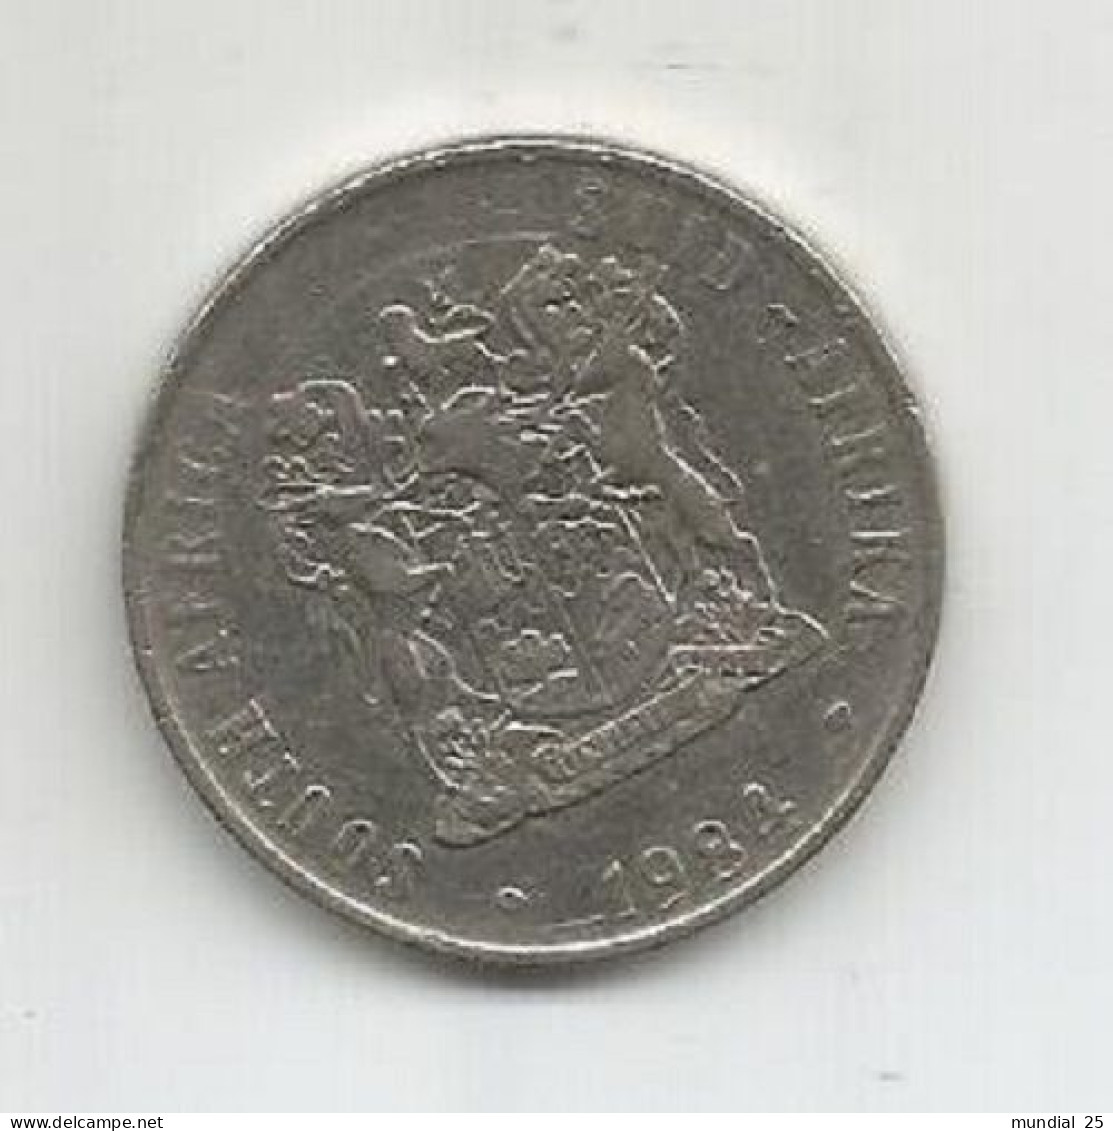 SOUTH AFRICA 50 CENTS 1984 - South Africa